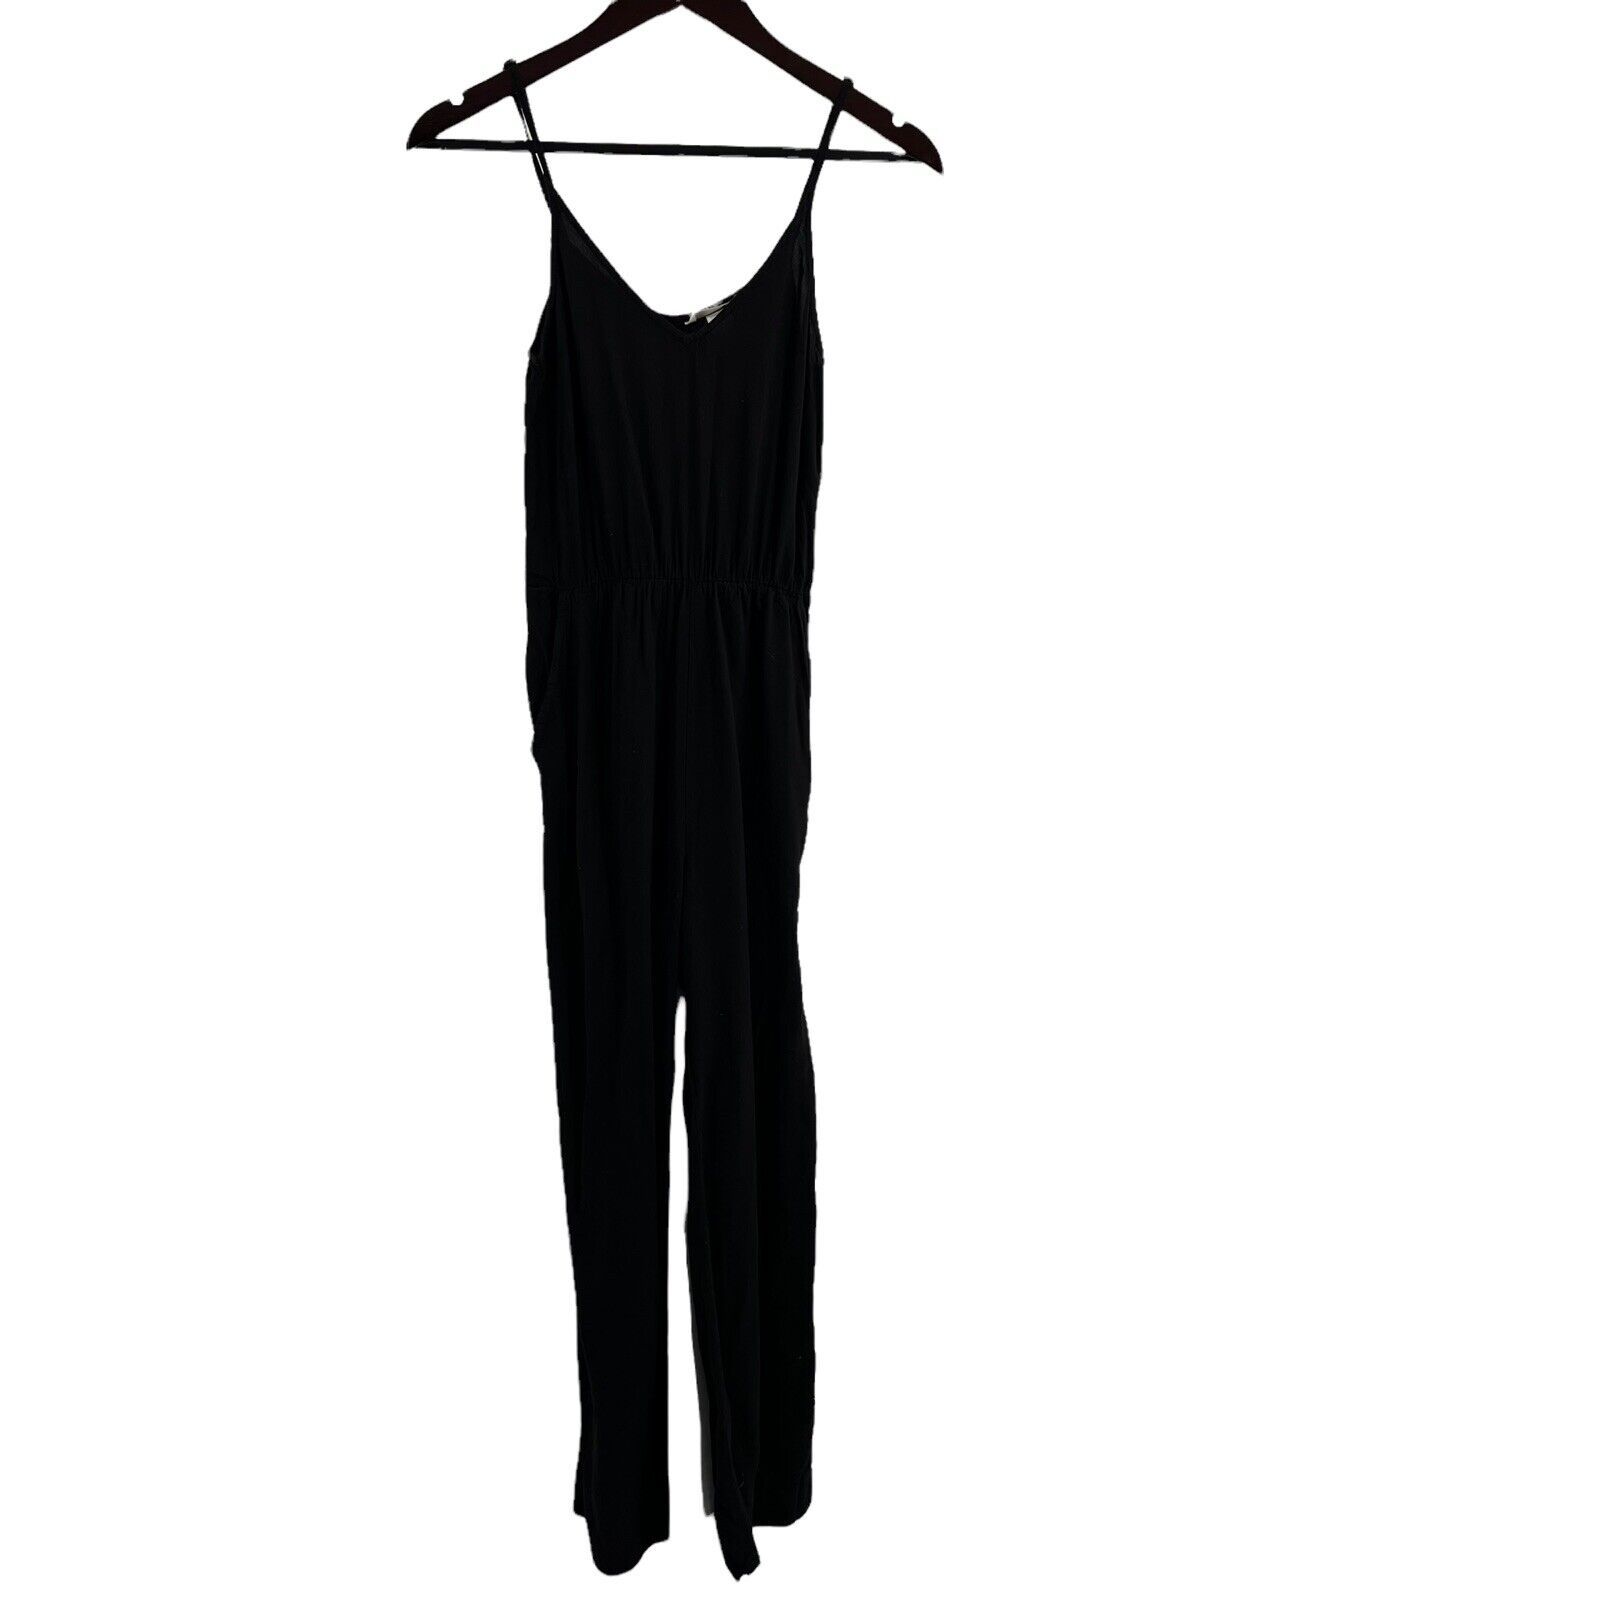 Primary image for H&M Black Lightweight Jumpsuit Size 2